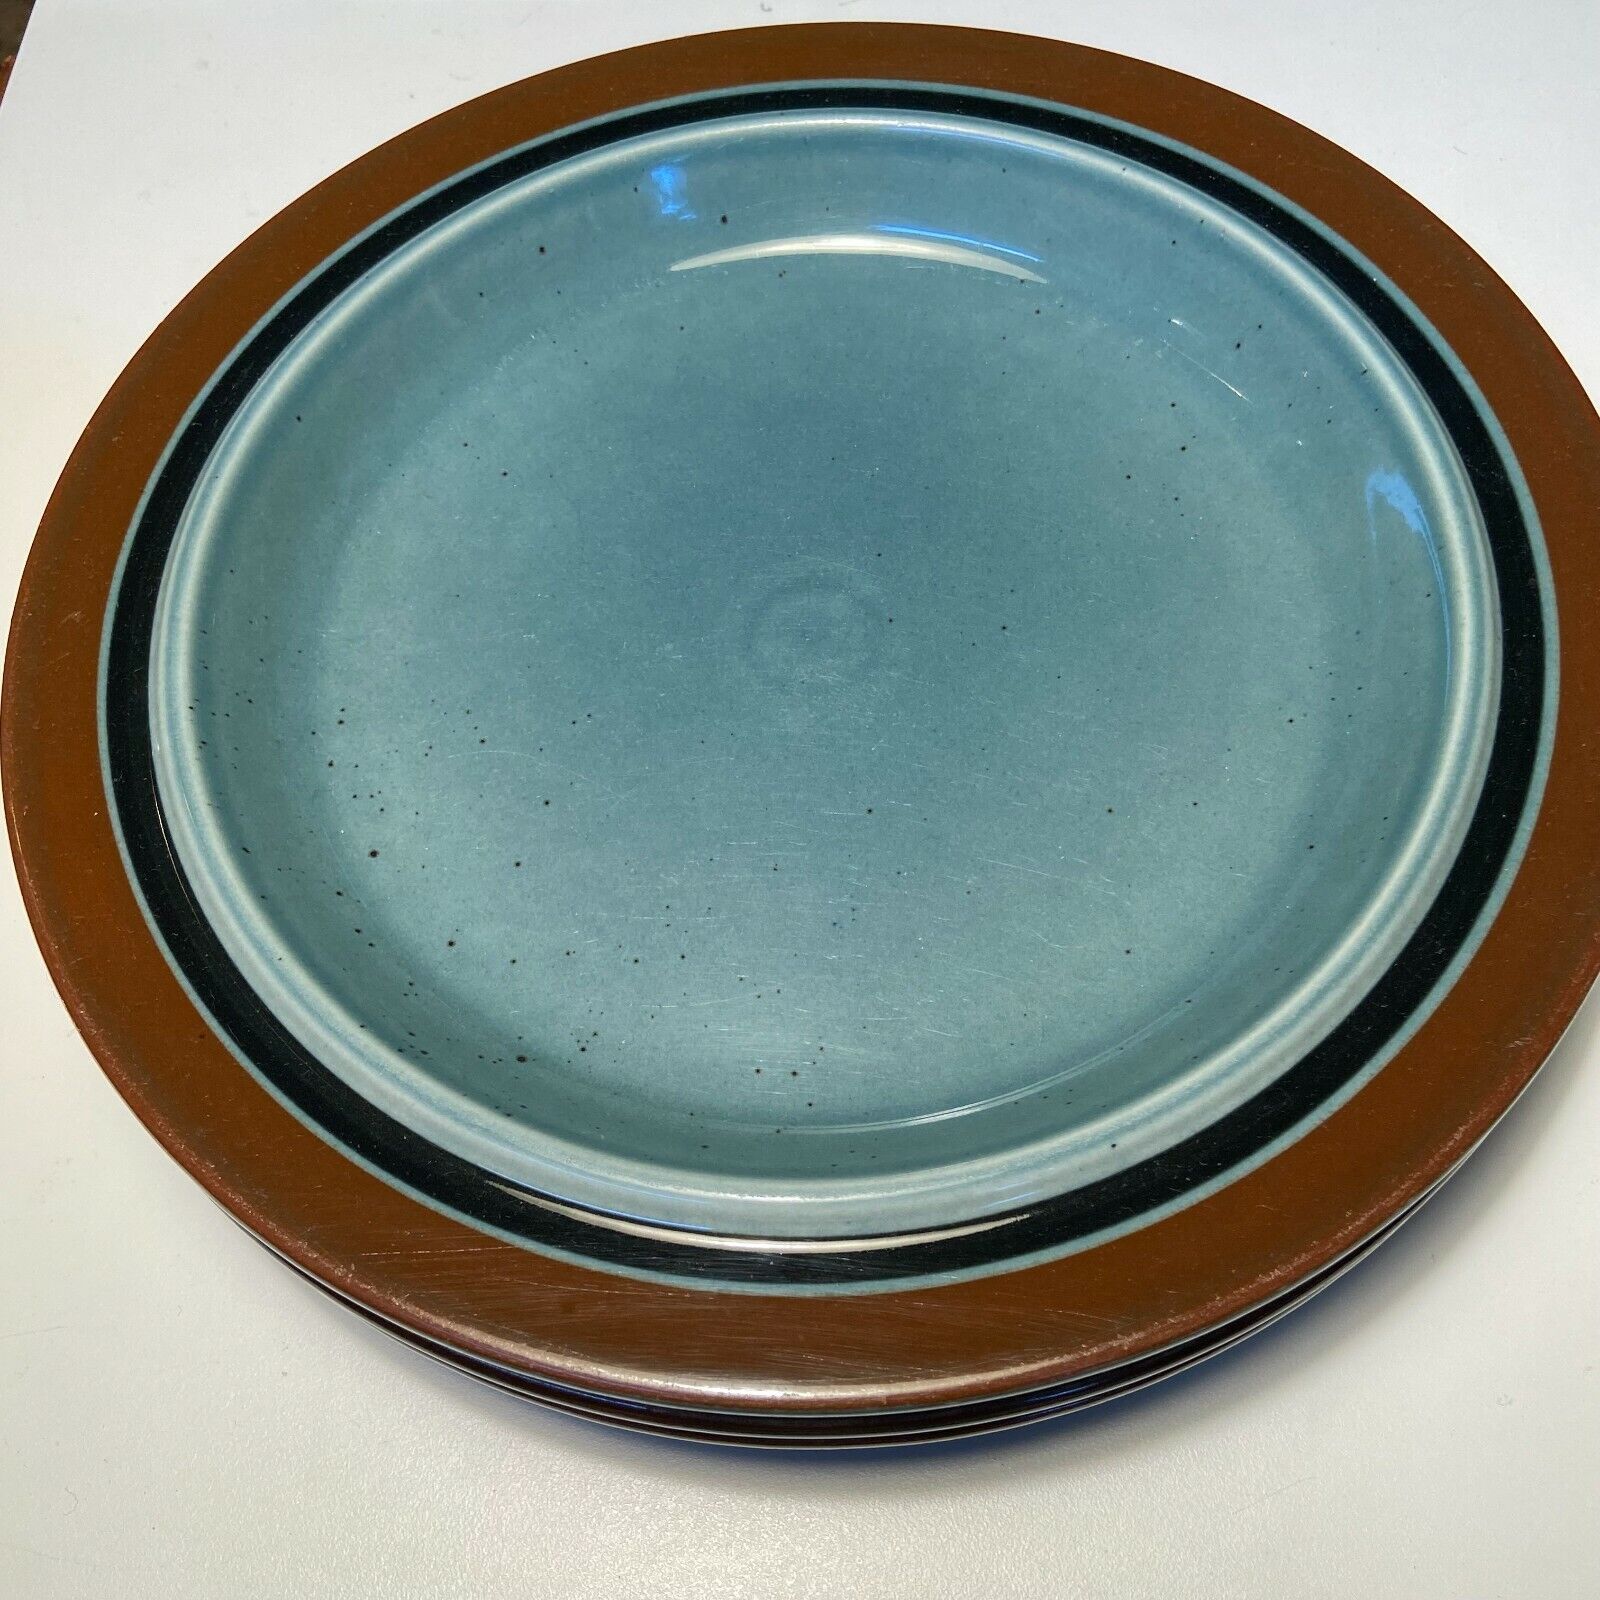 Read more about the article Arabia Finland PAJU YELLOW / MERI BLUE Plates Bowls Mid Century Modern CHOICE